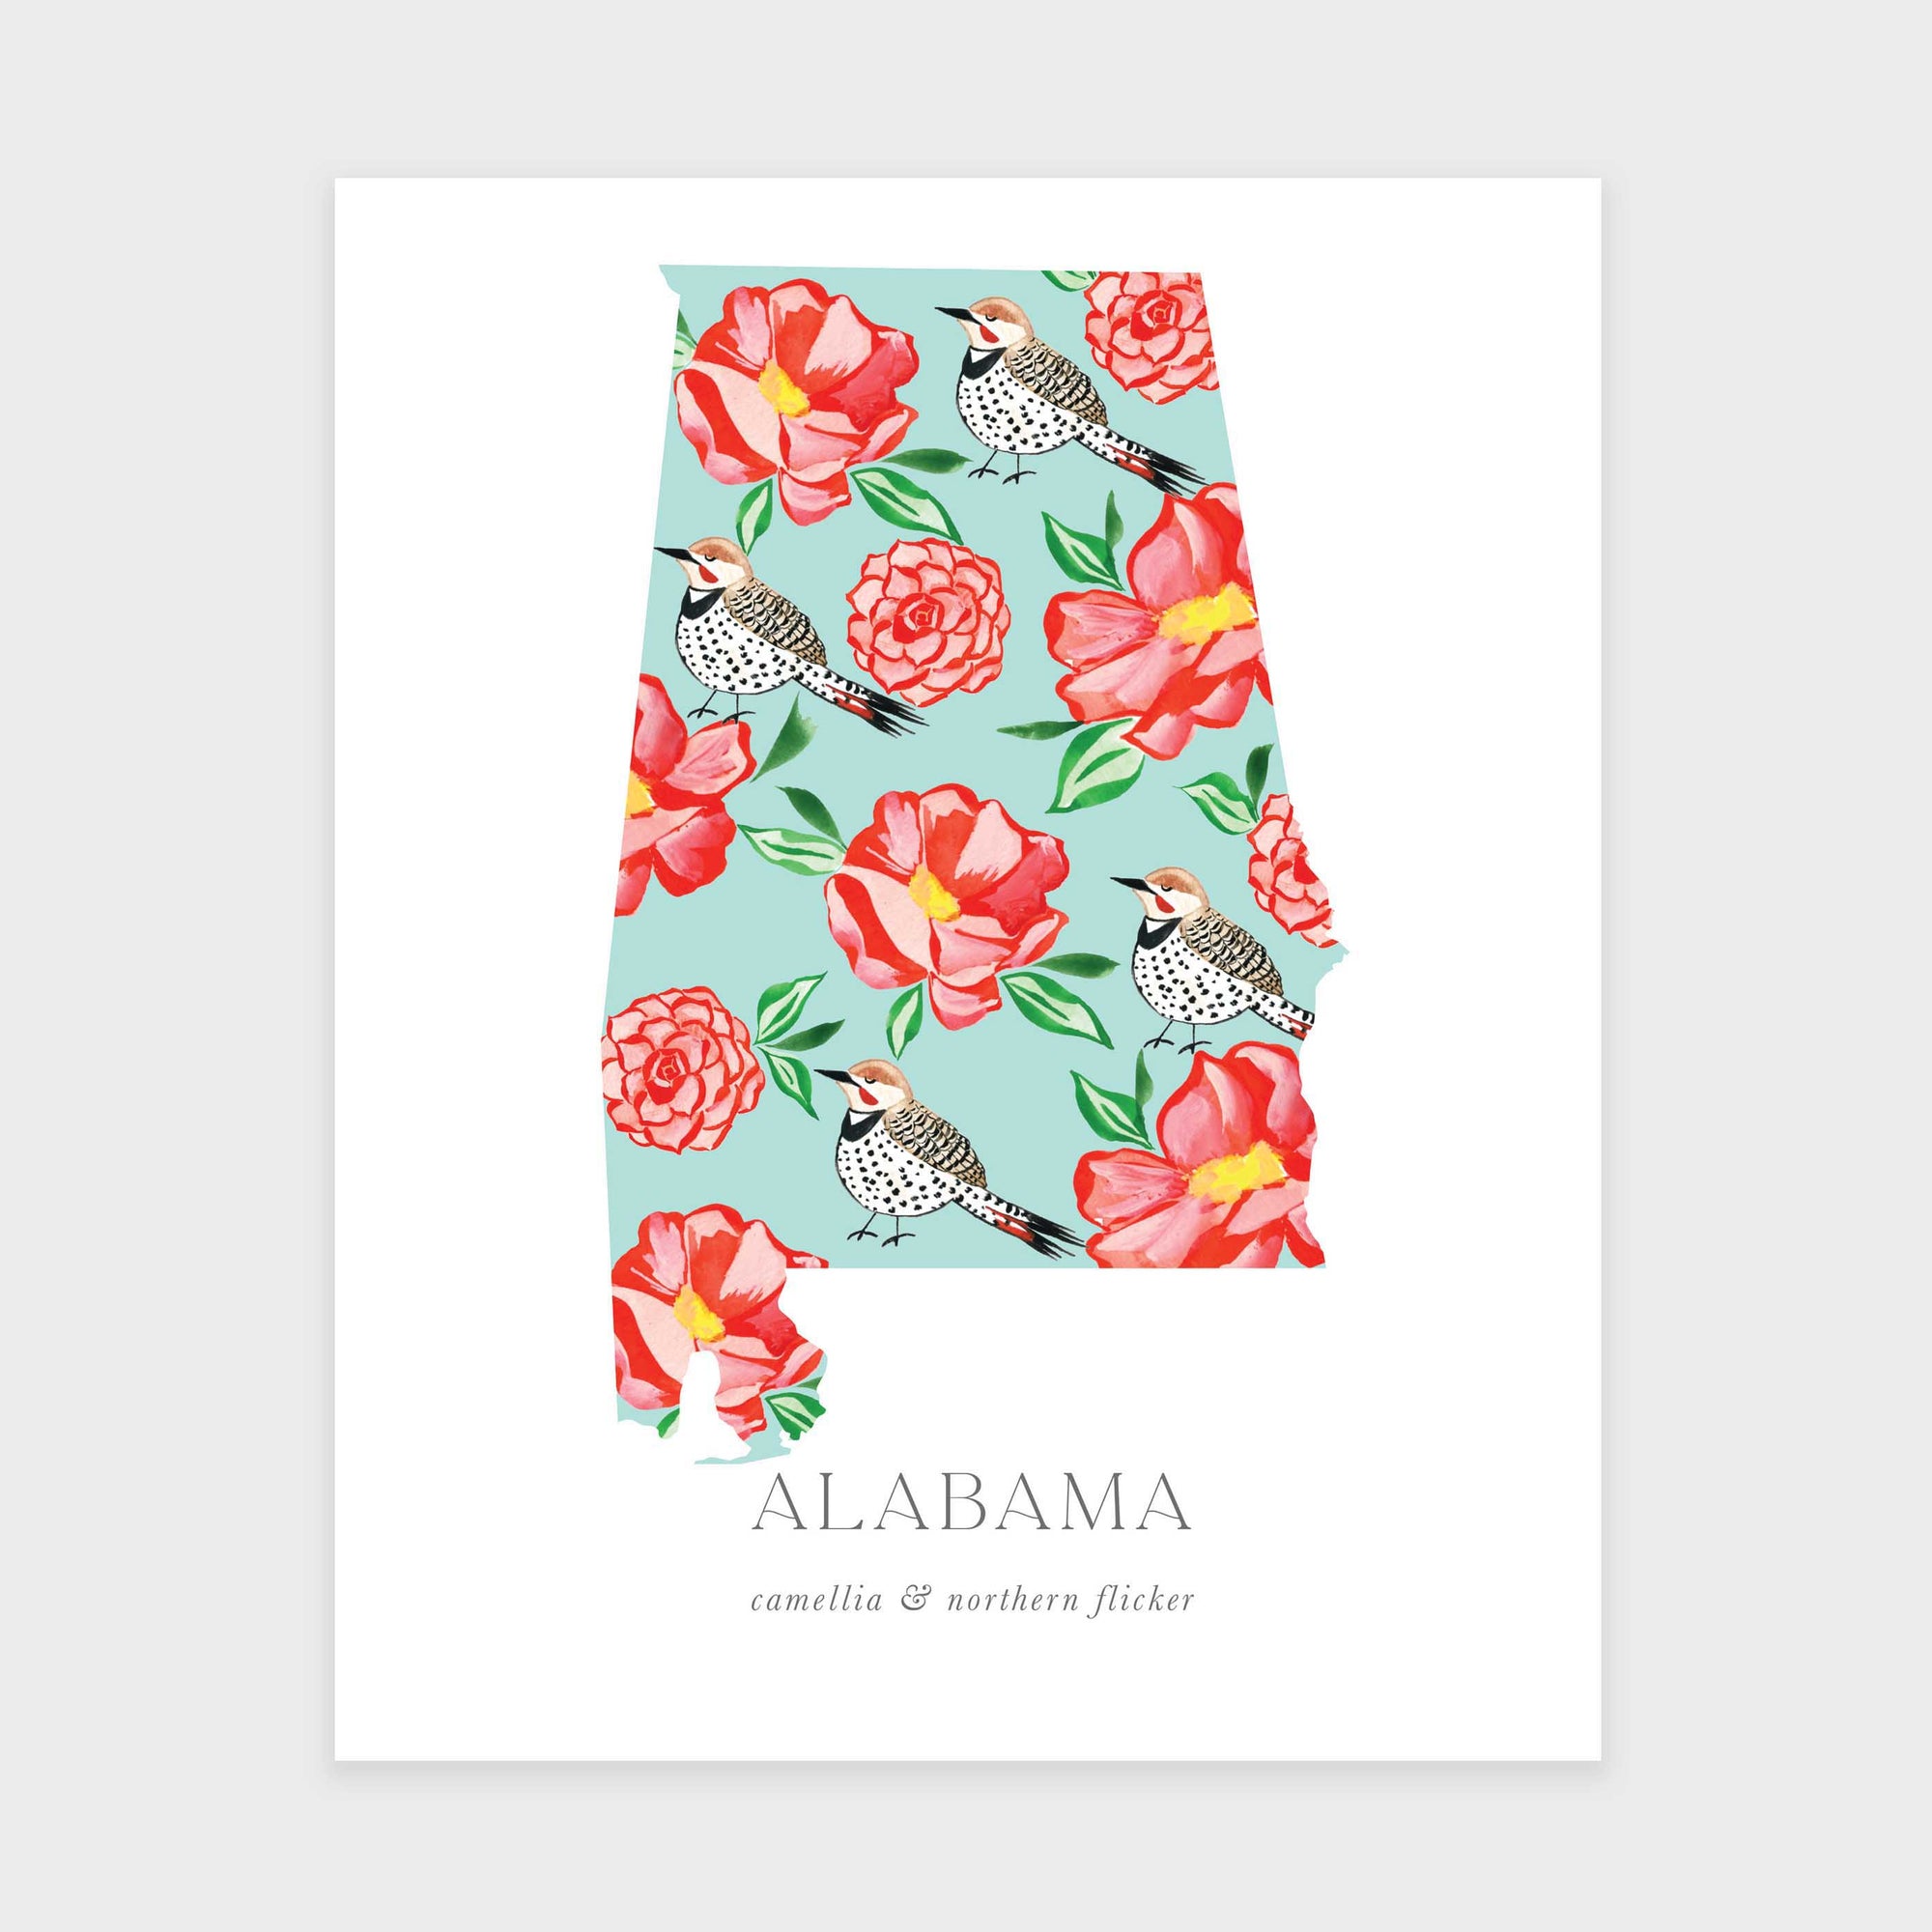 The state of Alabama camellia and northern flicker flower art print